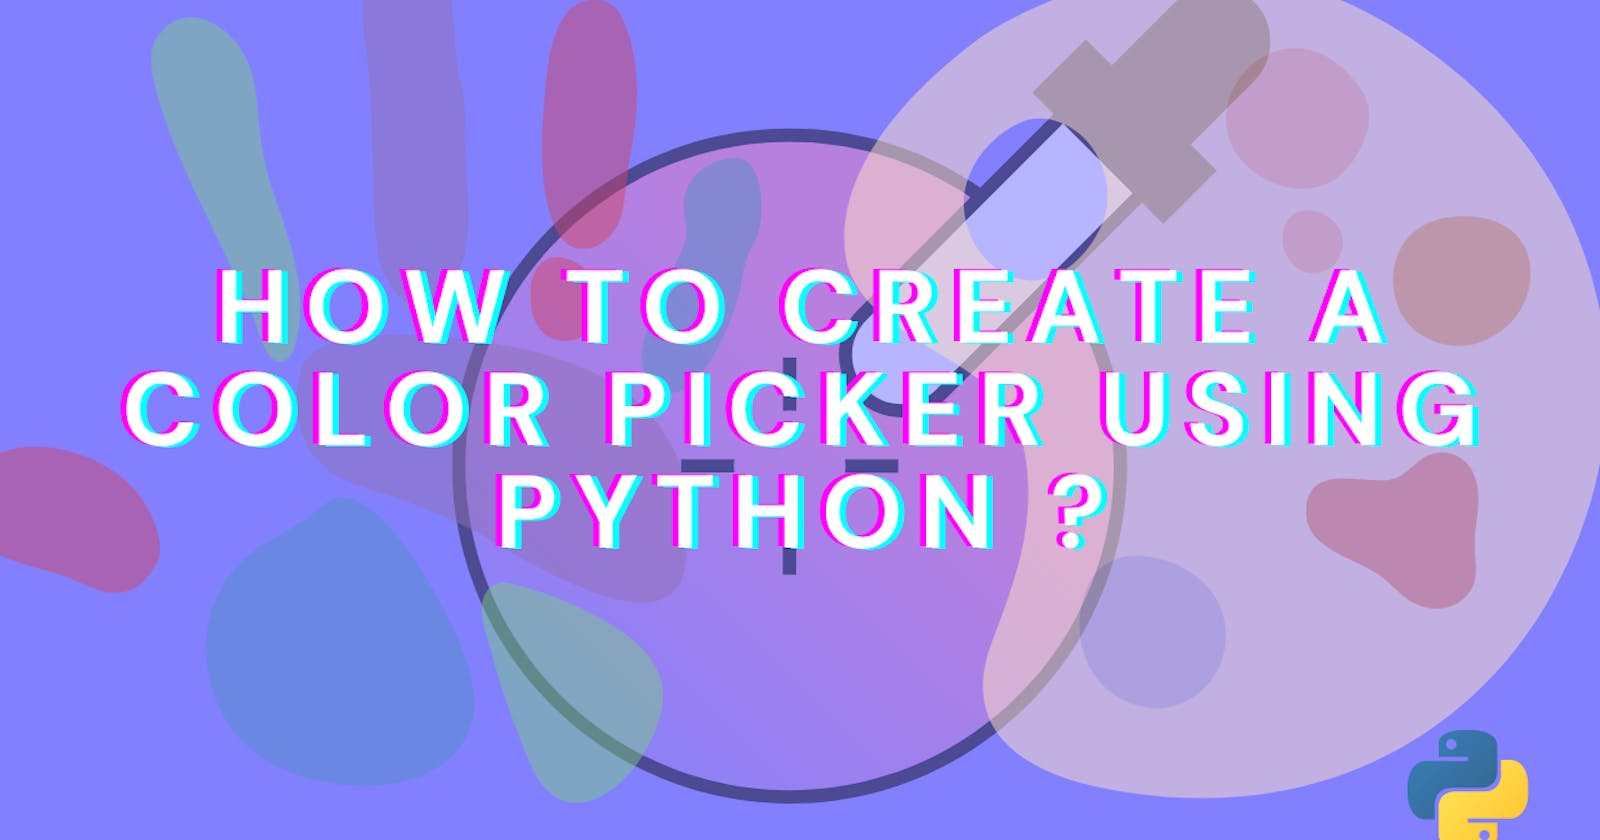 How to create a Color picker using Python ?